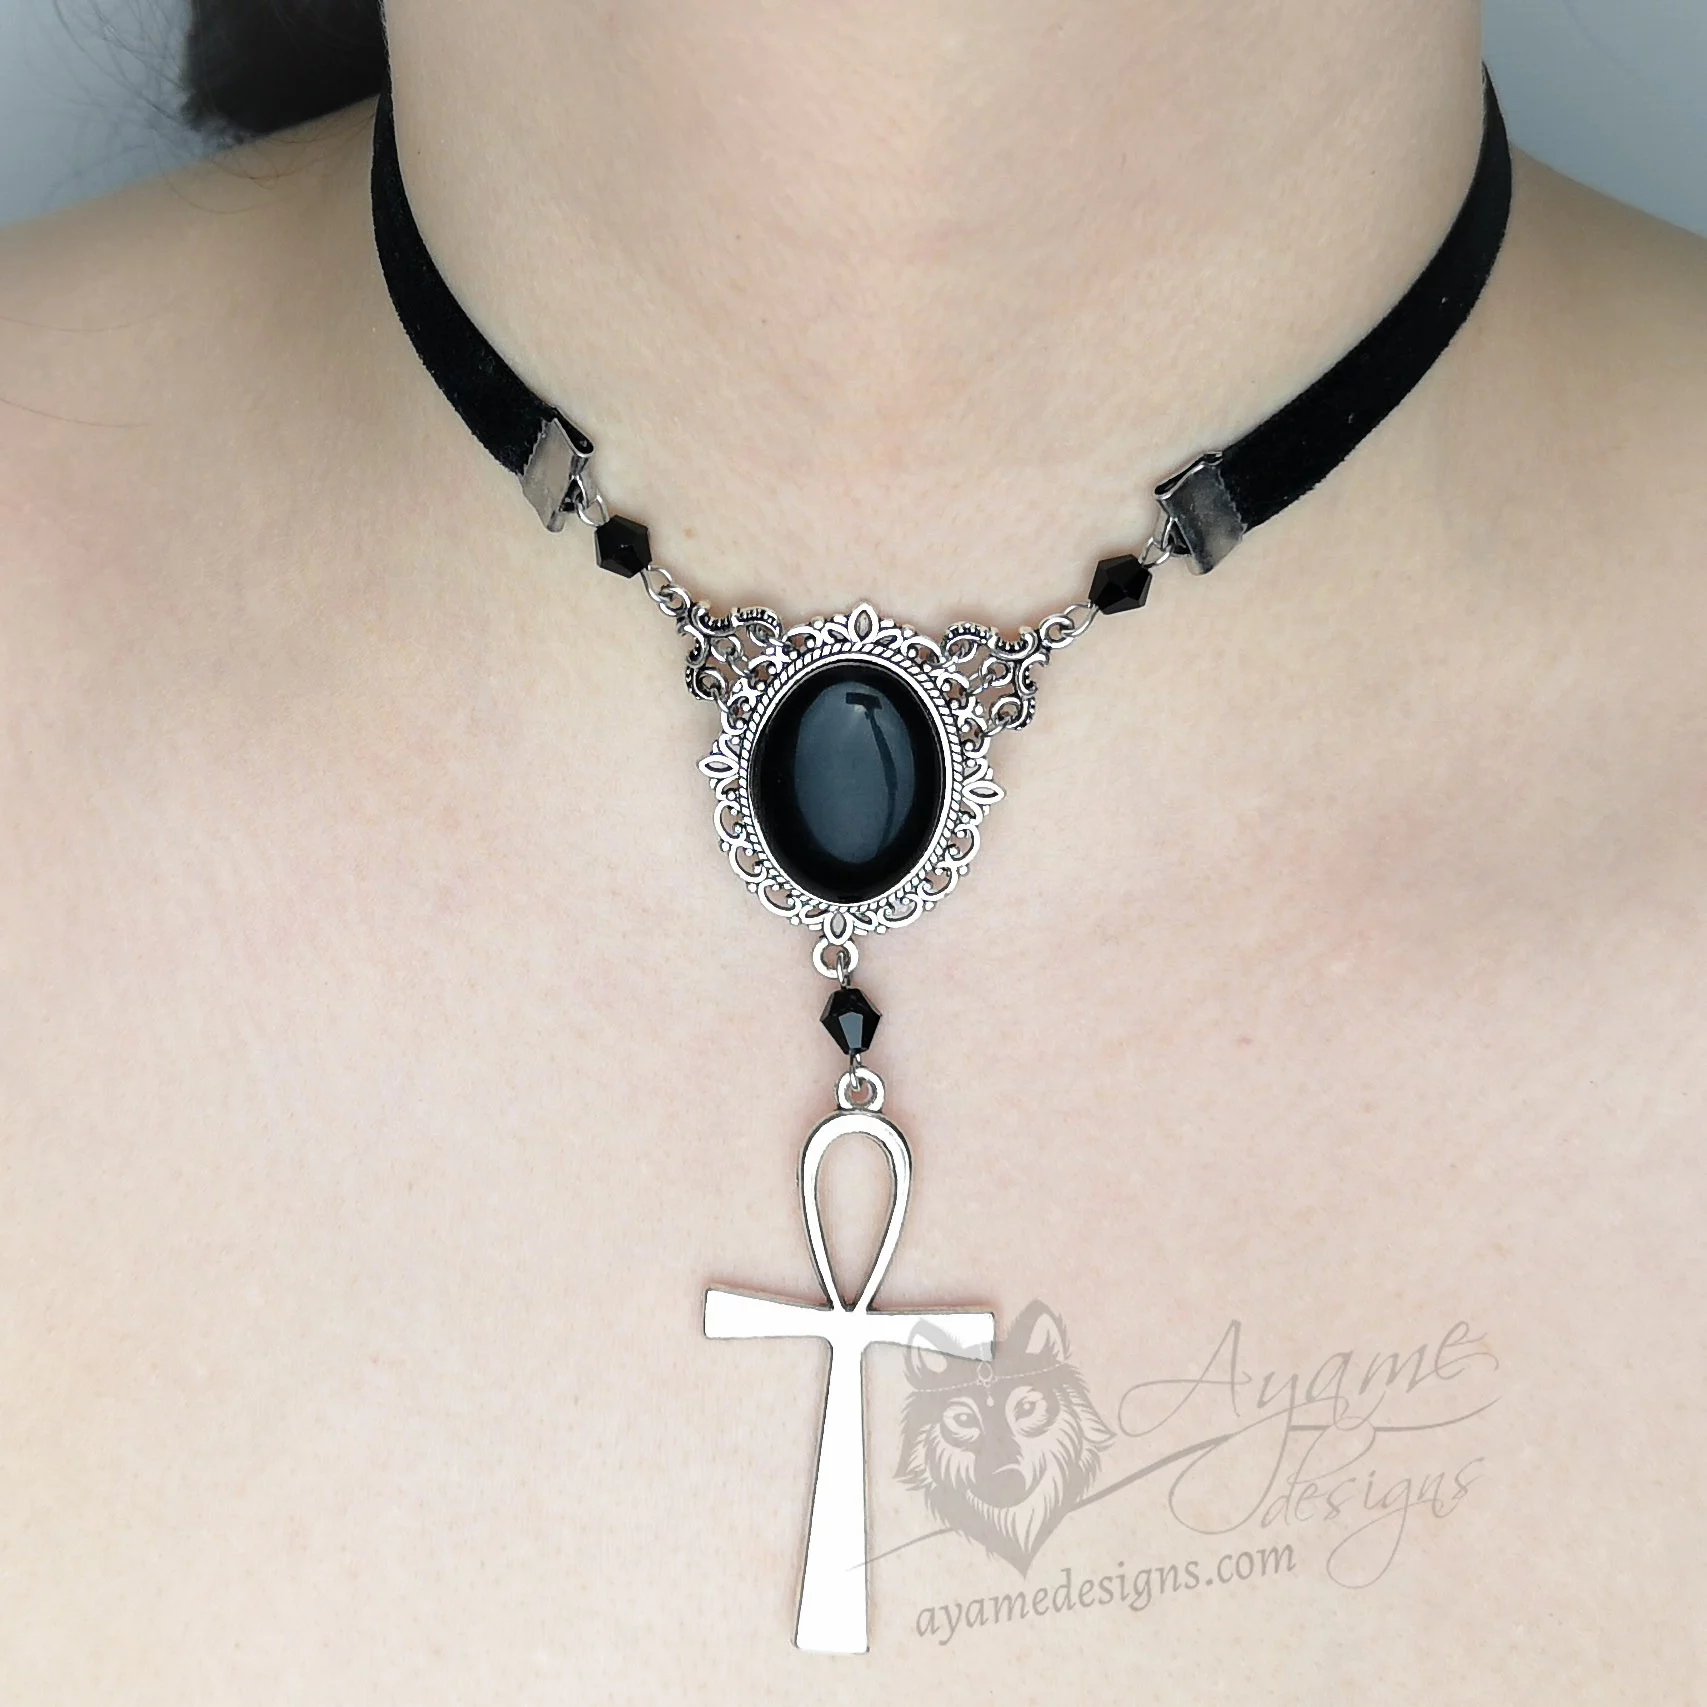 Handmade adjustable black velvet choker necklace with Austrian crystal beads, a large black resin cabochon pendant in a silver filigree frame, and an ankh pendant